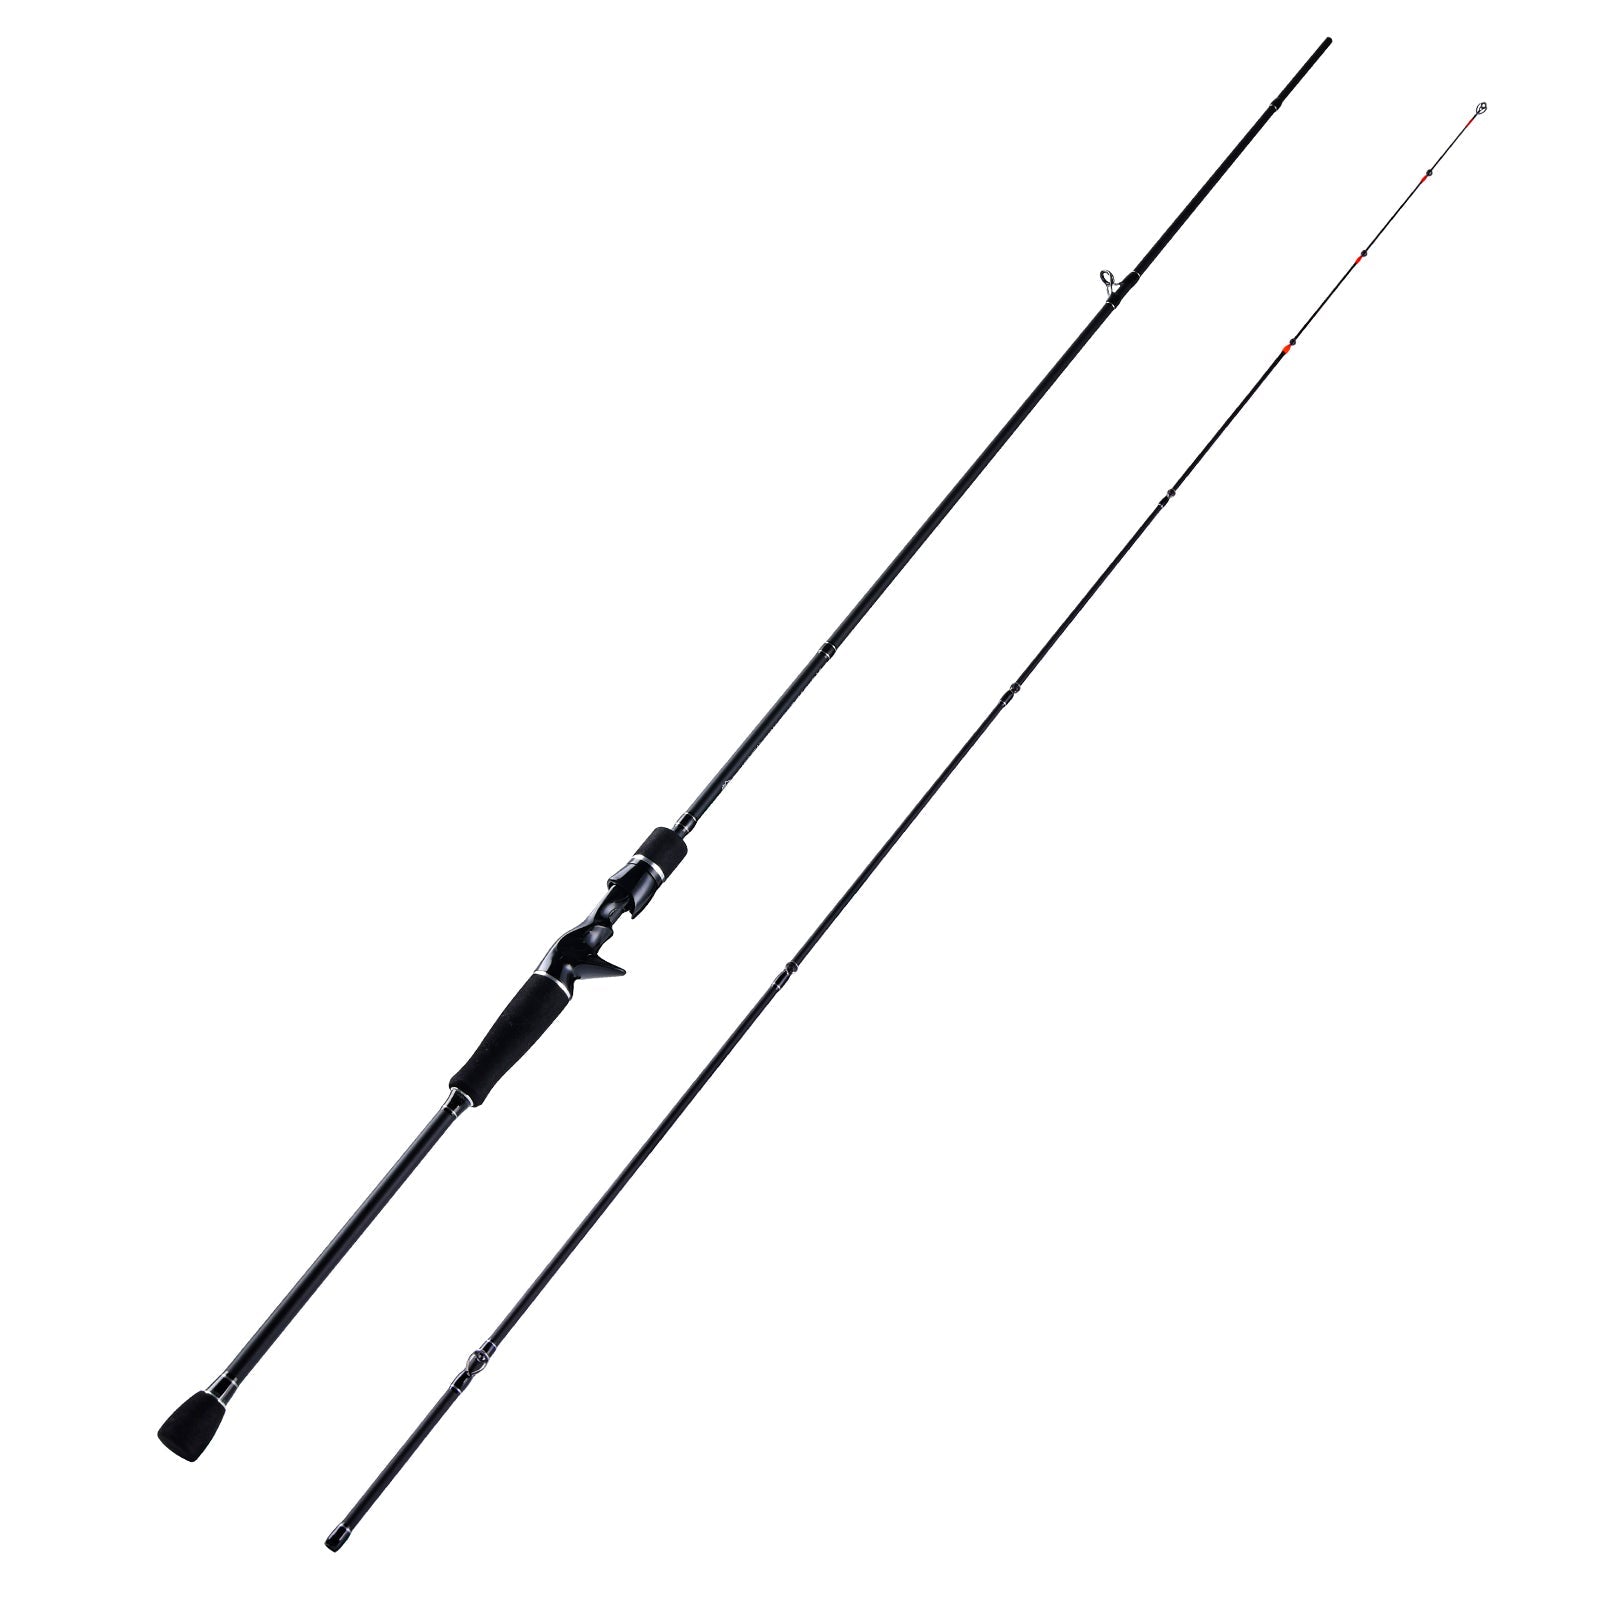 Goture Ultralight Fishing Rod, 2 Piece Crappie Trout Rod, Spinning/Casting  Rod - 2.59M-Casting